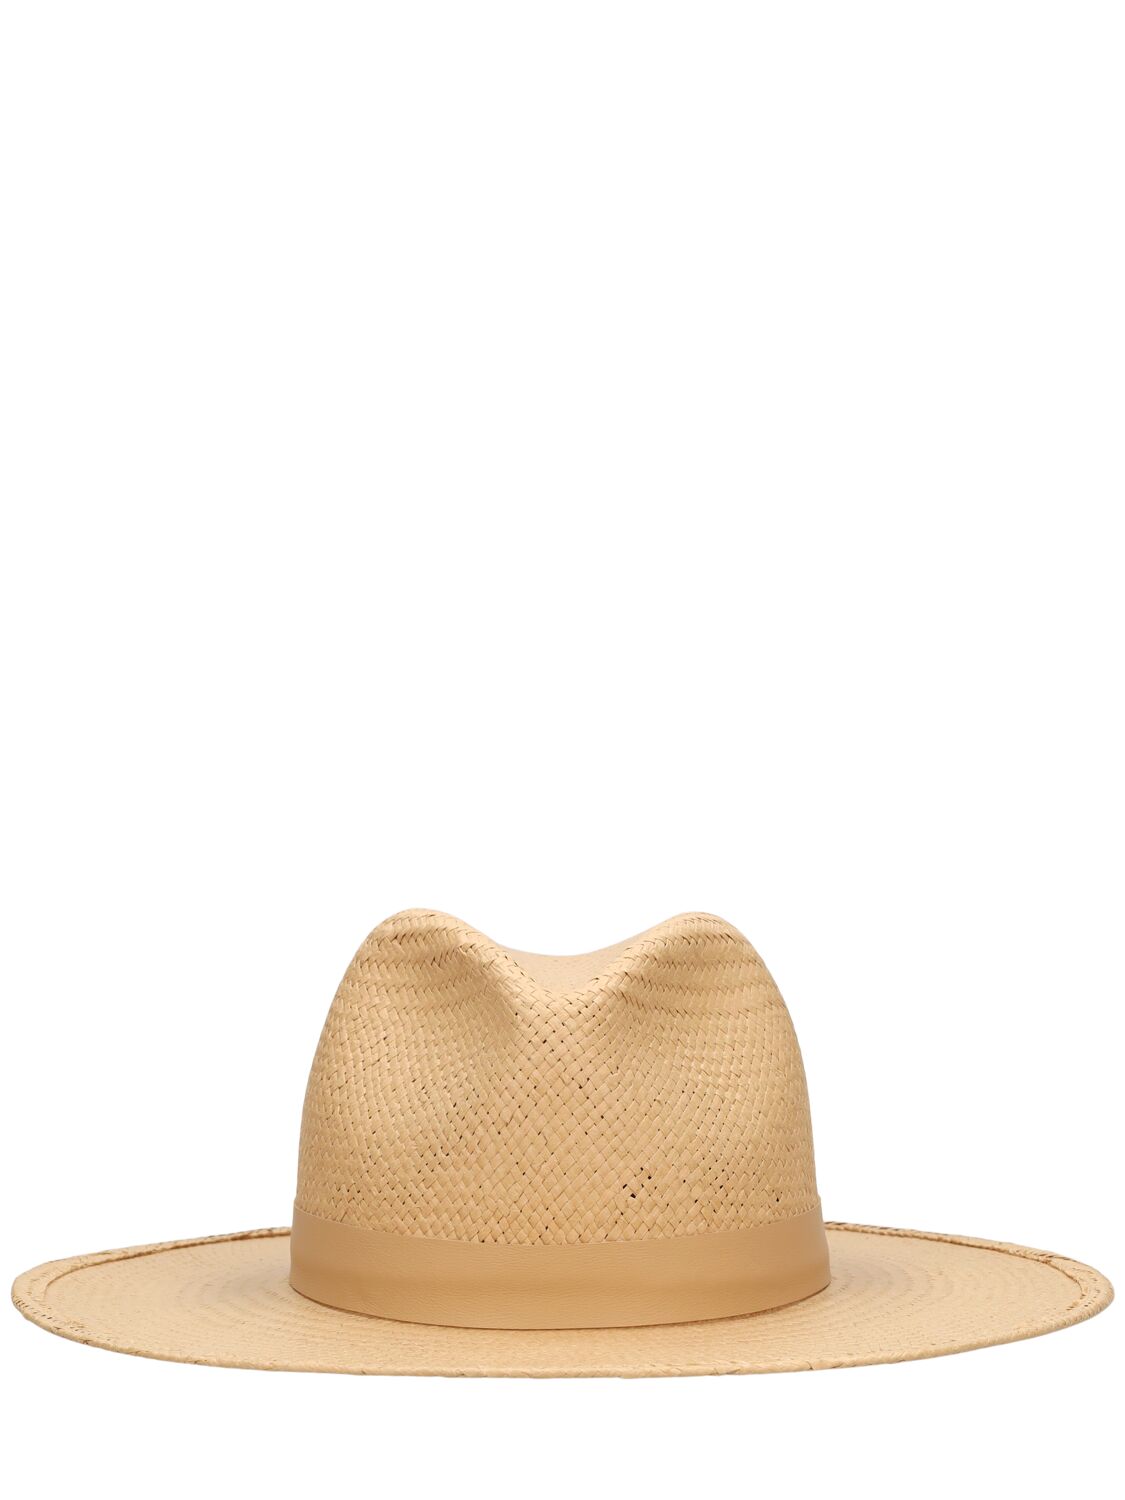 Janessa Leone Simone Packable Fedora Hat In 沙色